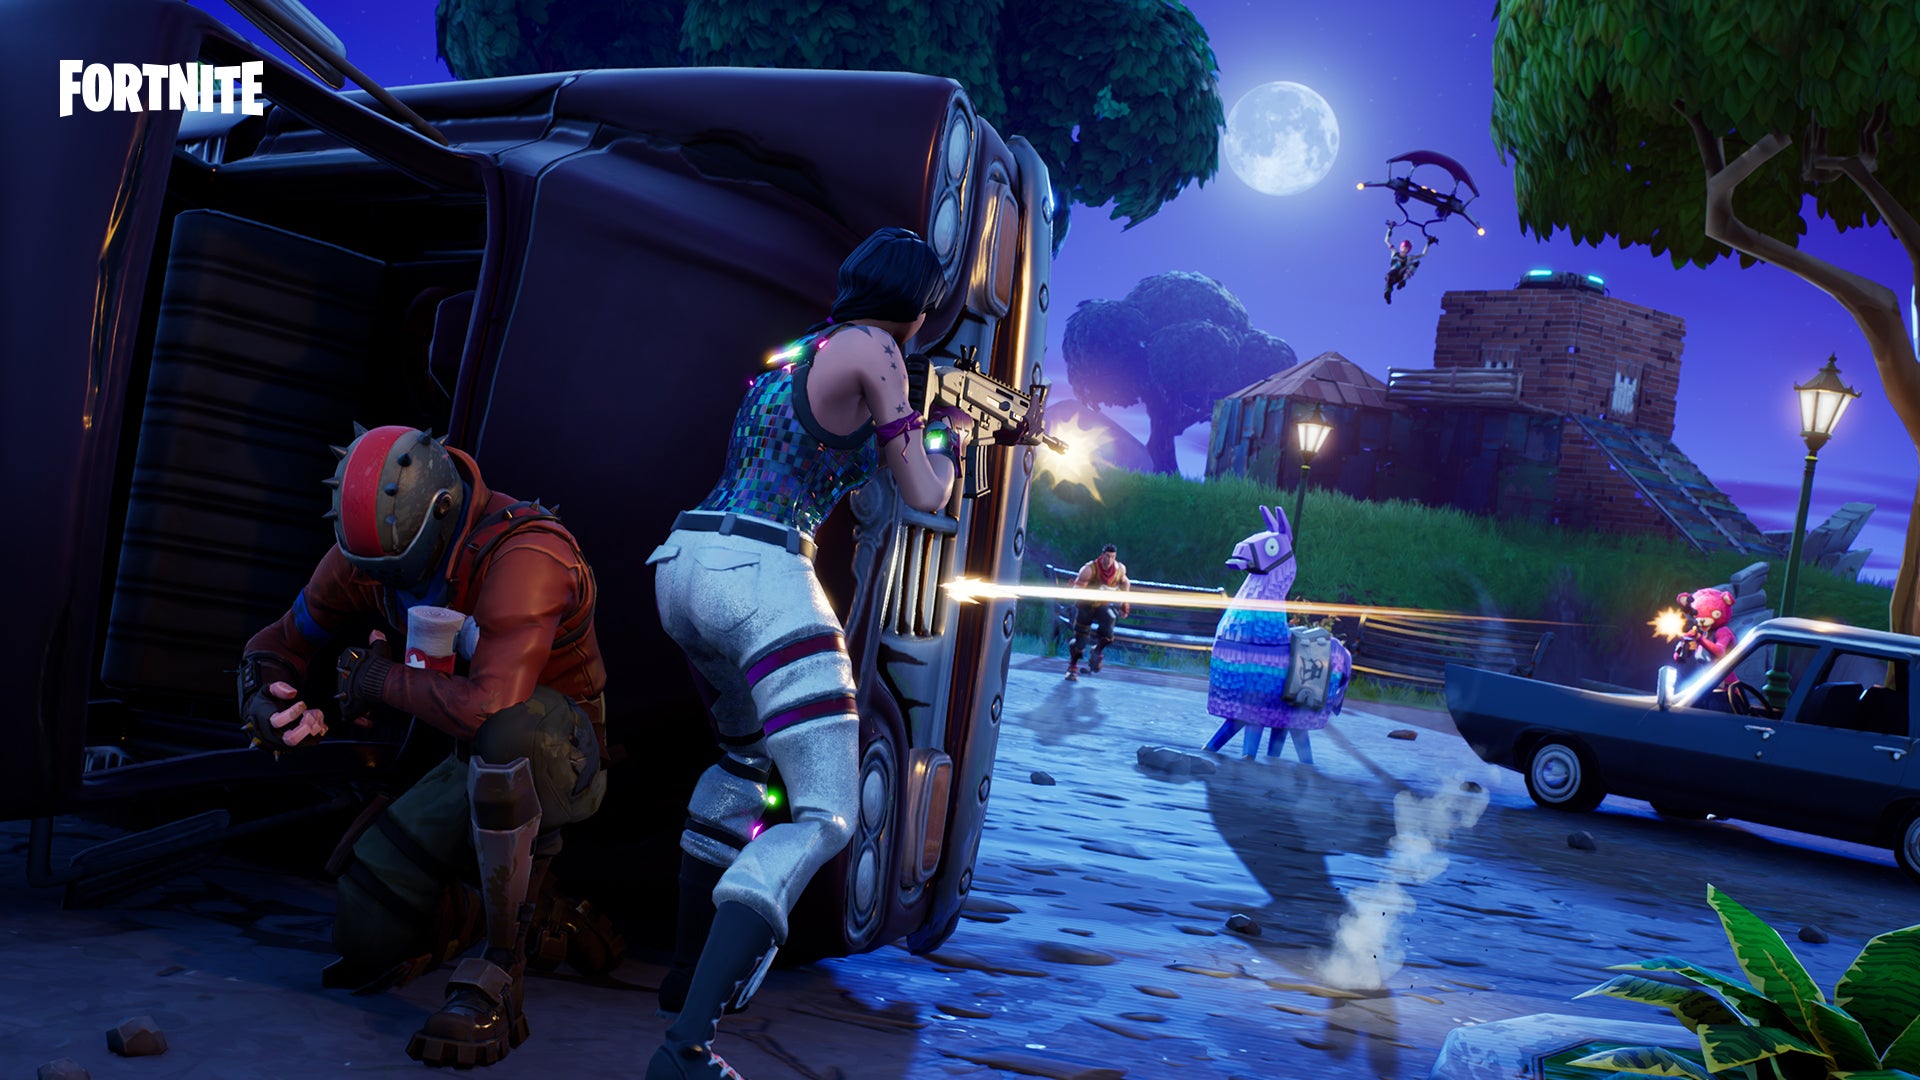 Image for Fortnite v6.31 update adds Epic and Legendary Pump Shotguns, Team Rumble LTM and Canny Valley Act 2